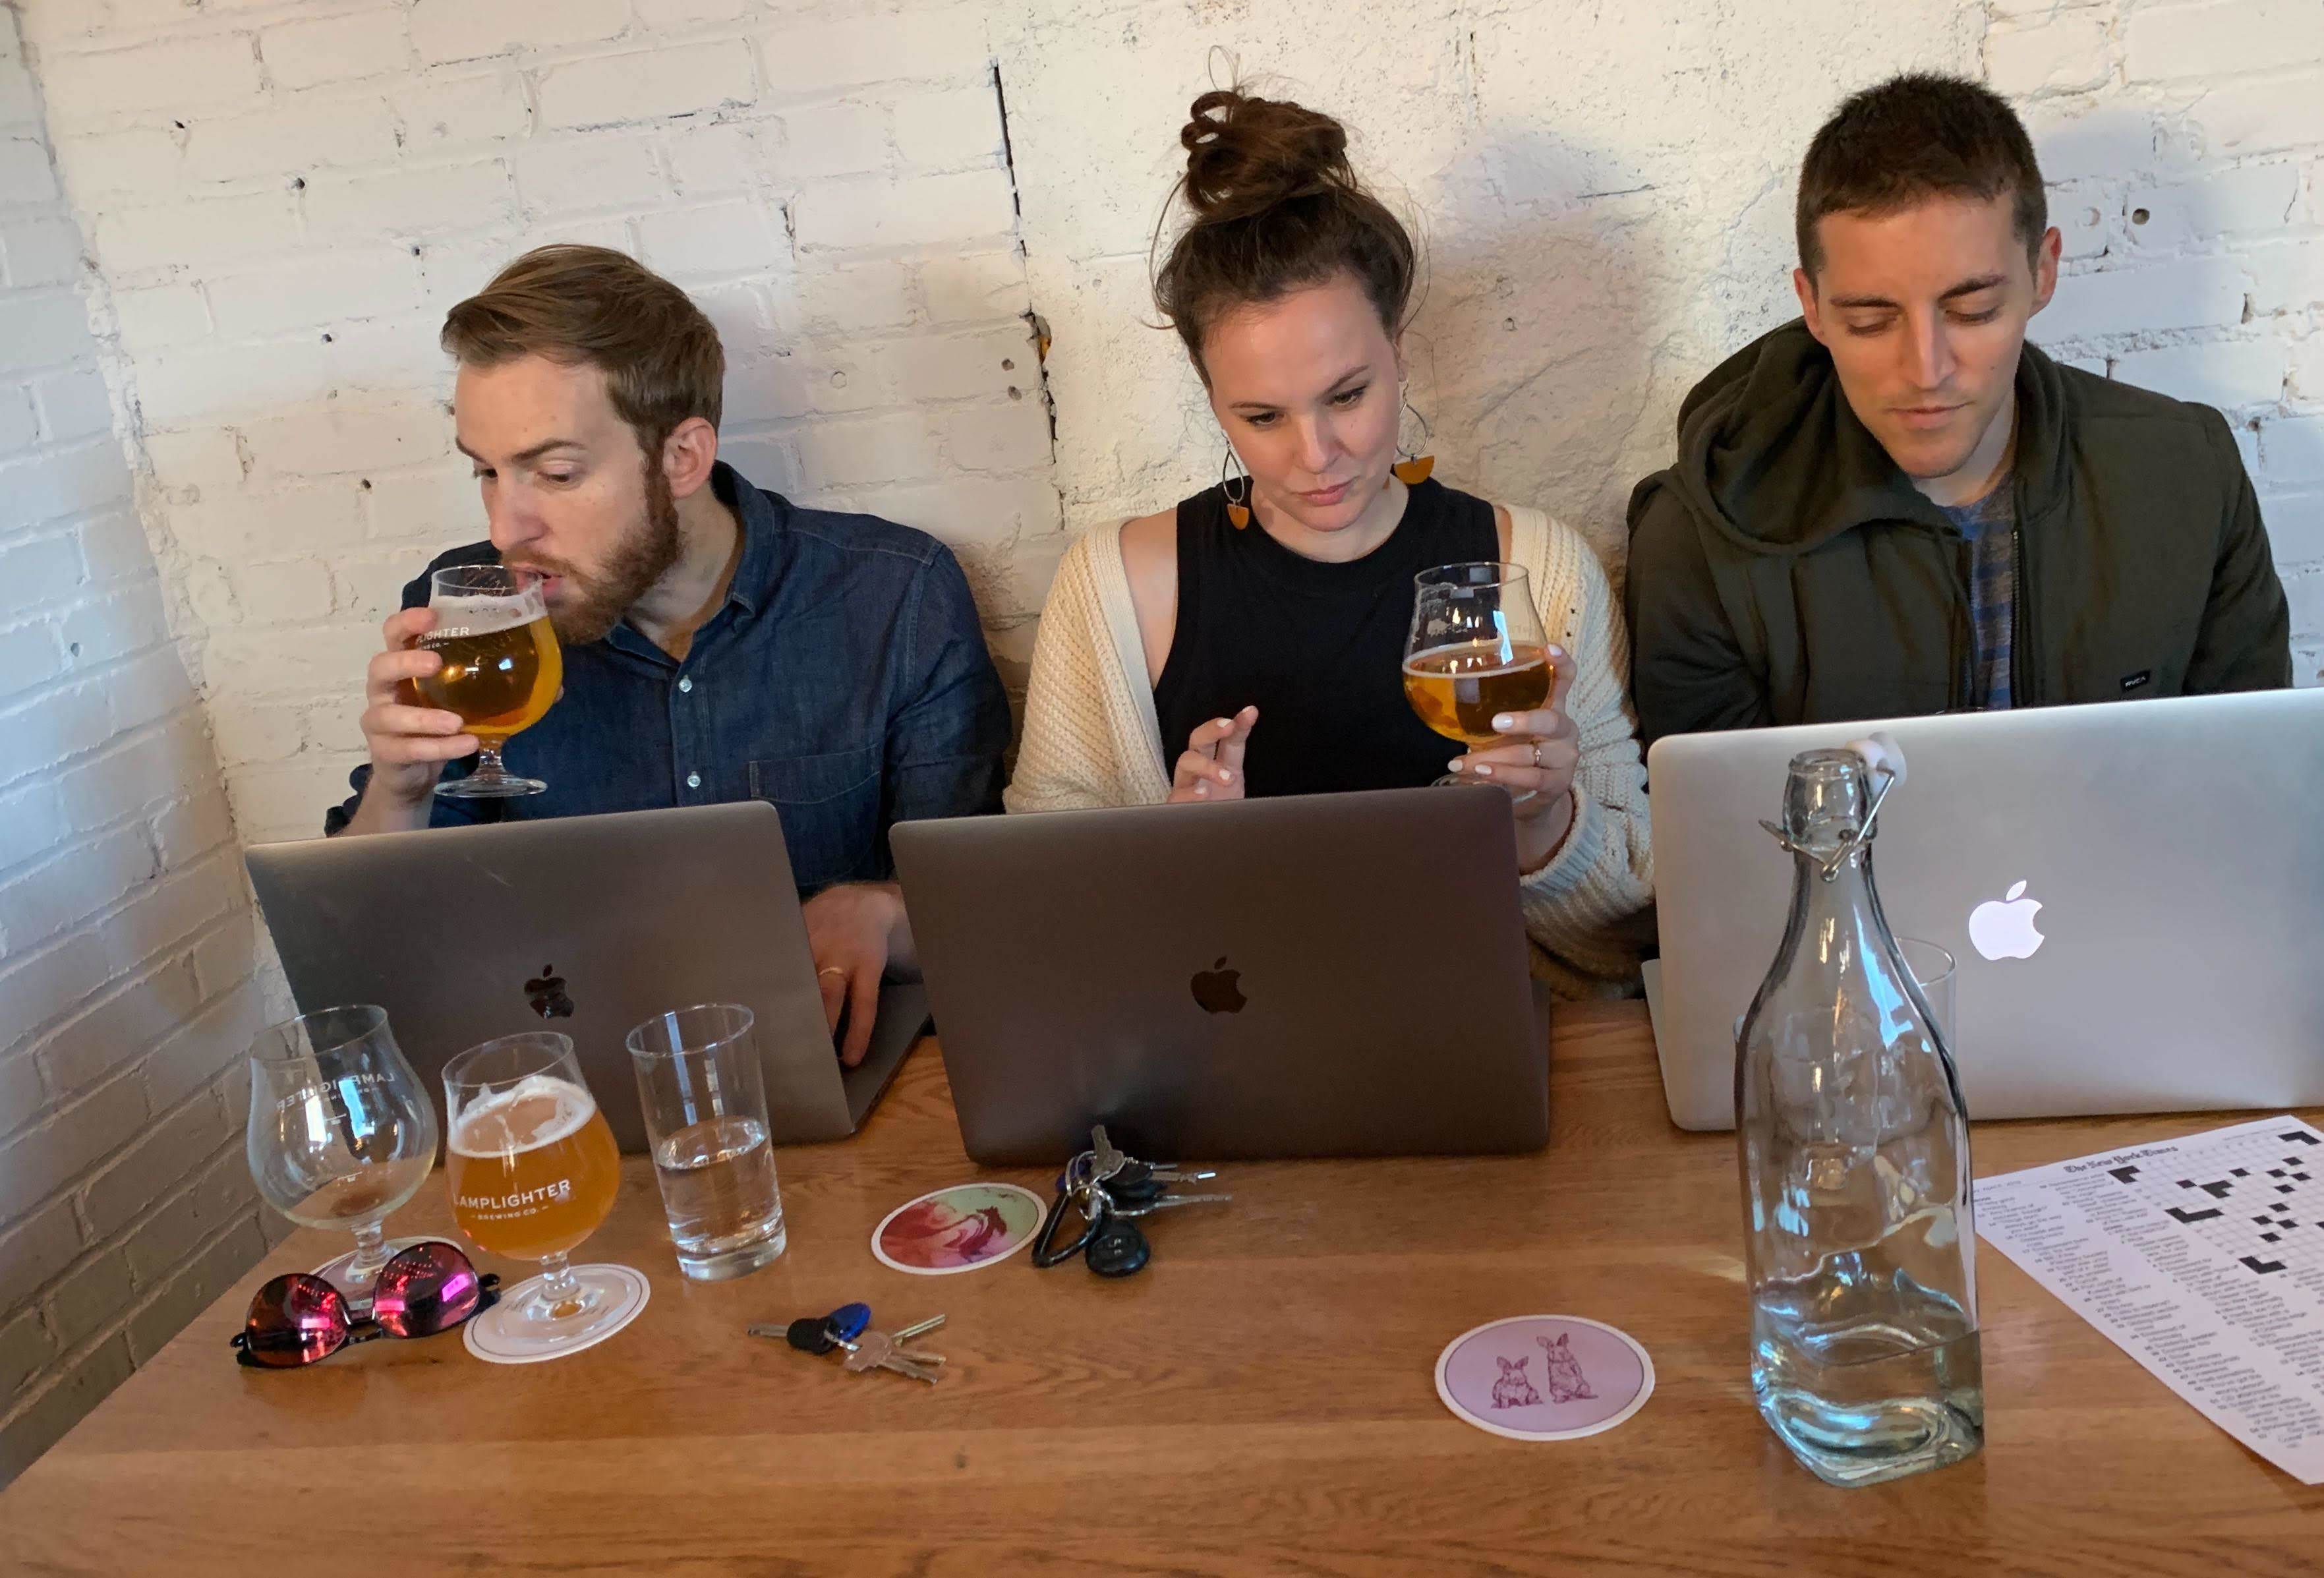 Three people seated at a table working on Apple laptops.